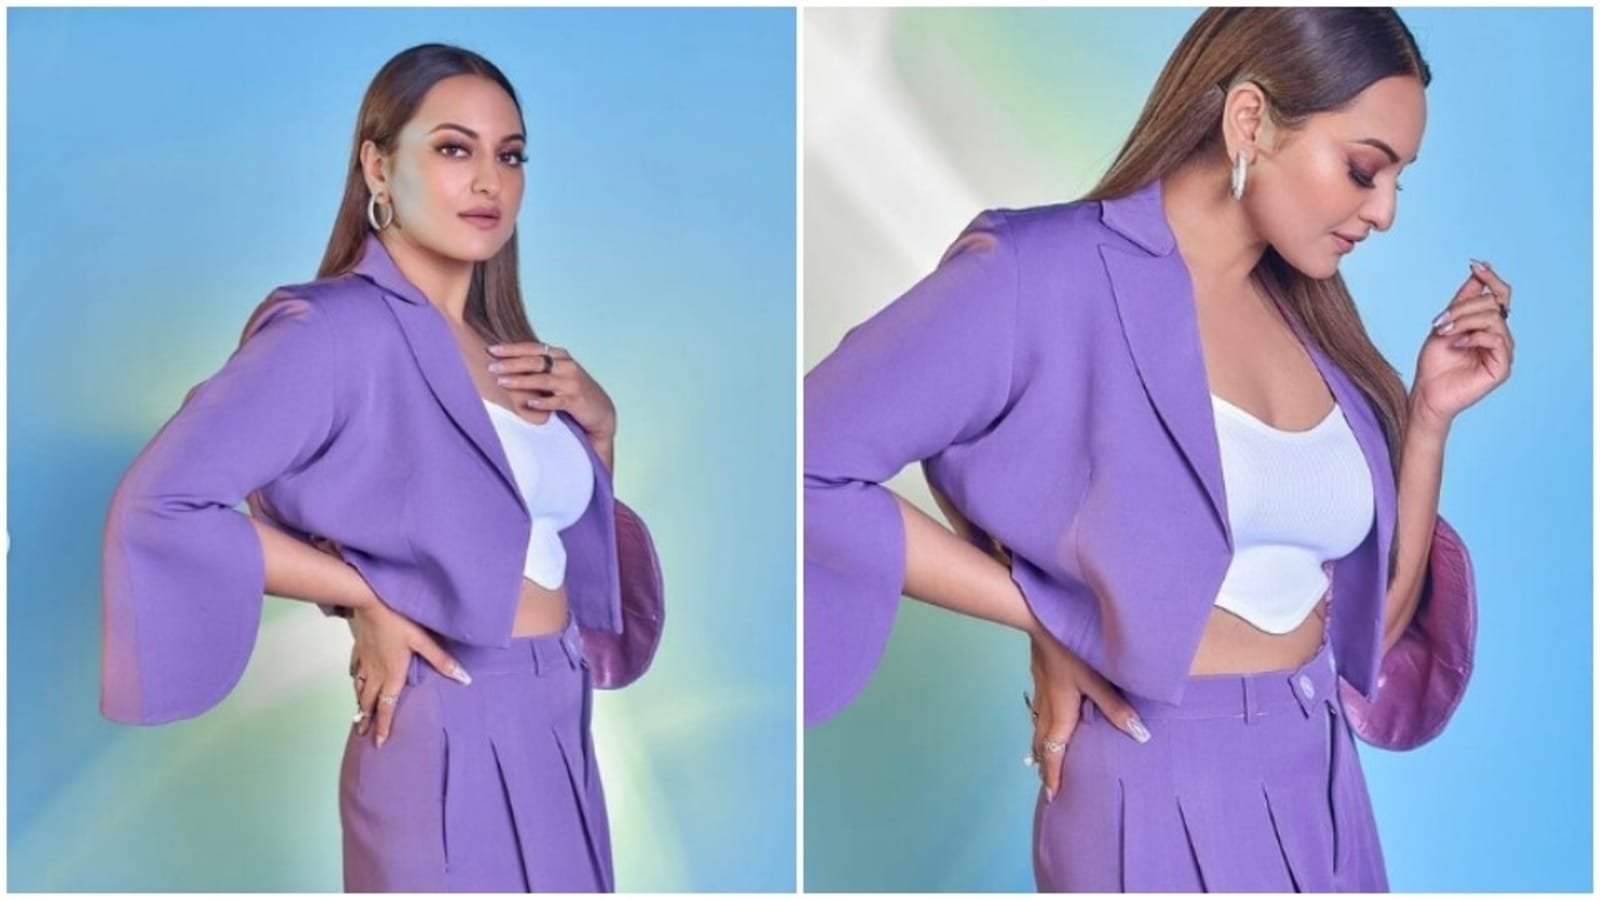 Sonakshi Sinha’s purple ensemble is everything we need to power through the week